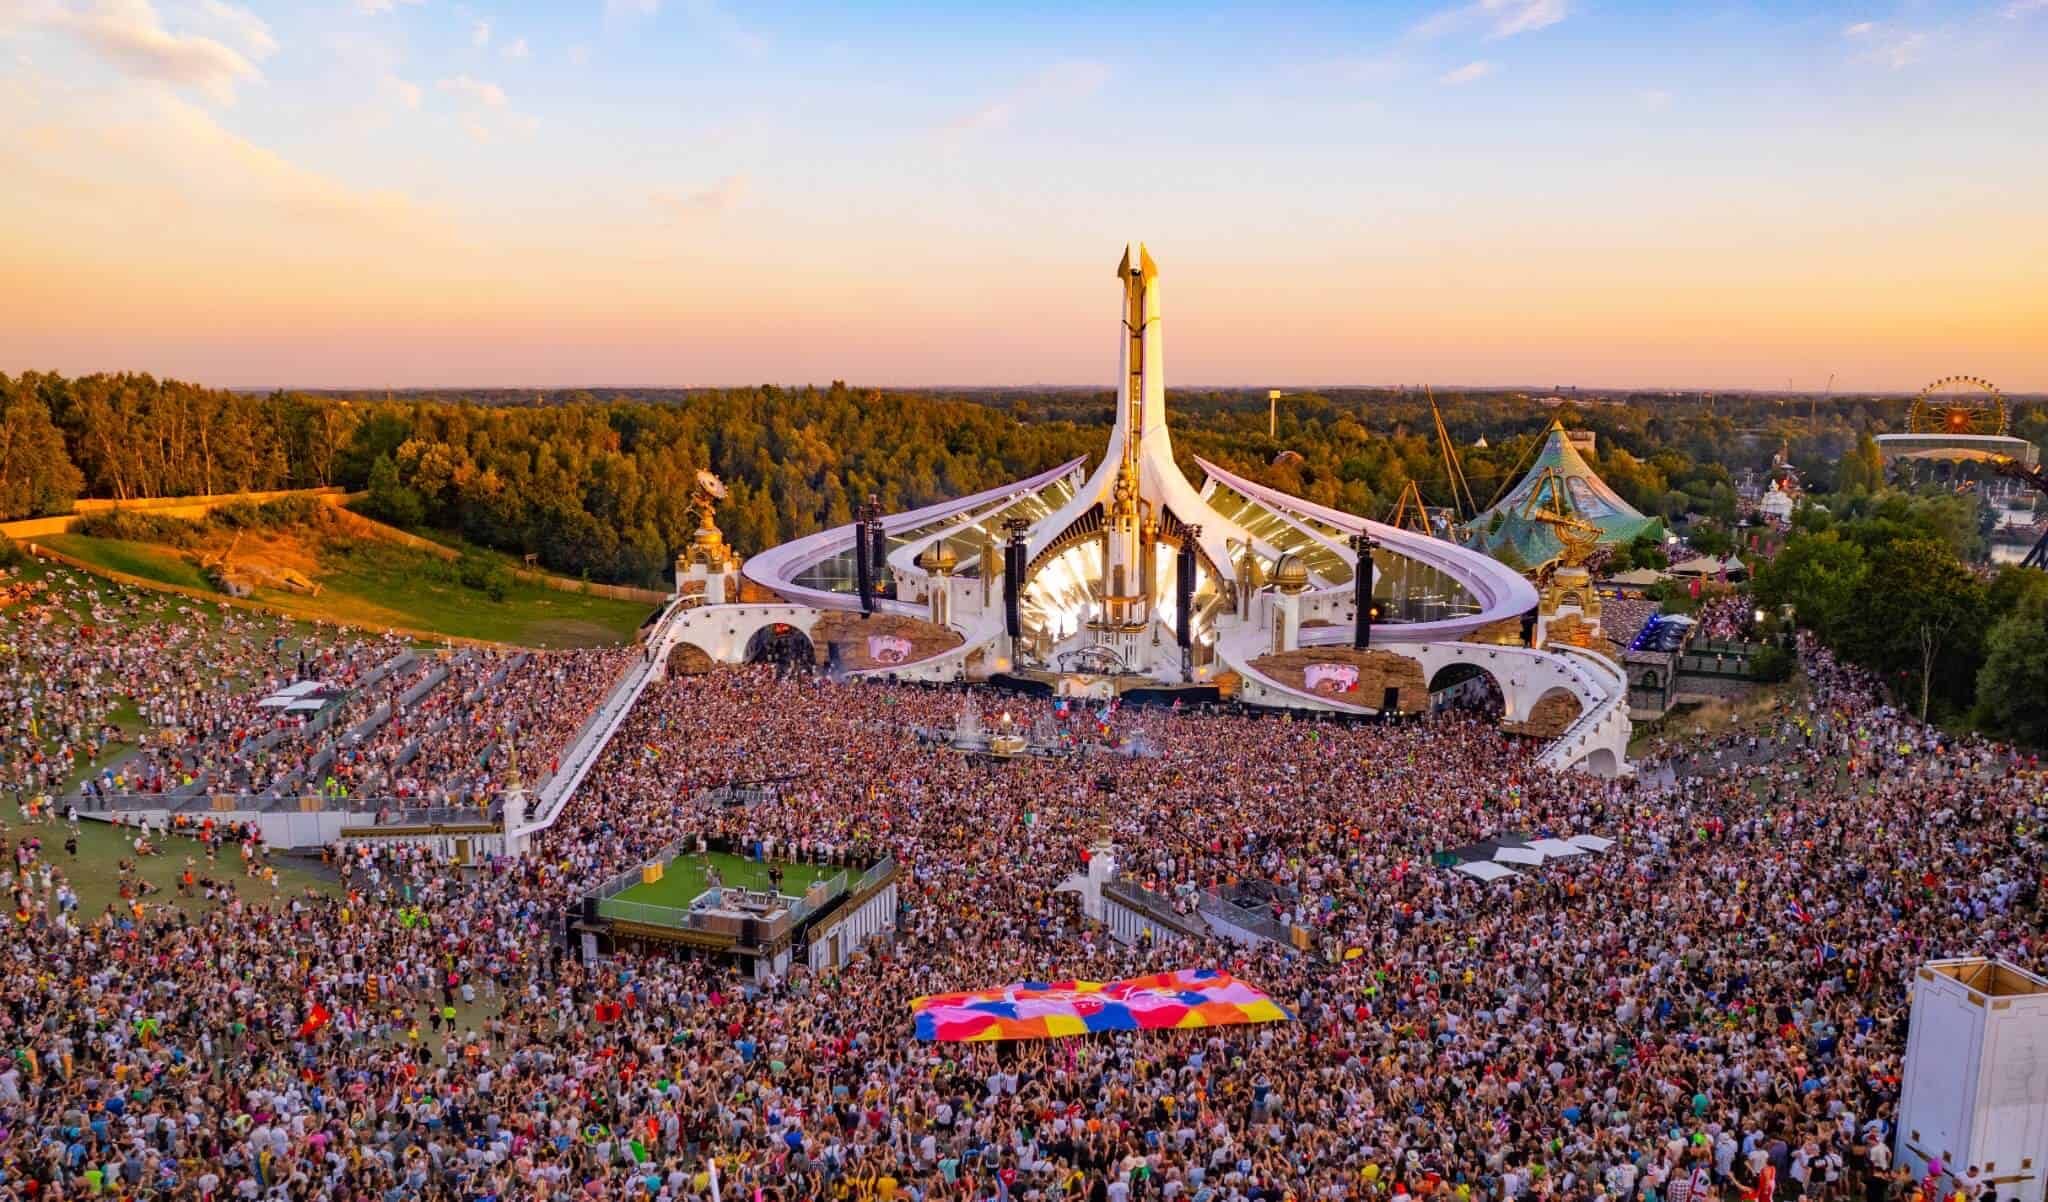 Tomorrowland shares first teaser for 2023 event, Pioneer introduces DDJ-FLX4, Kid Cudi reveals he is in the studio with David Guetta - WTEMN [2022-11 (Week #45)]